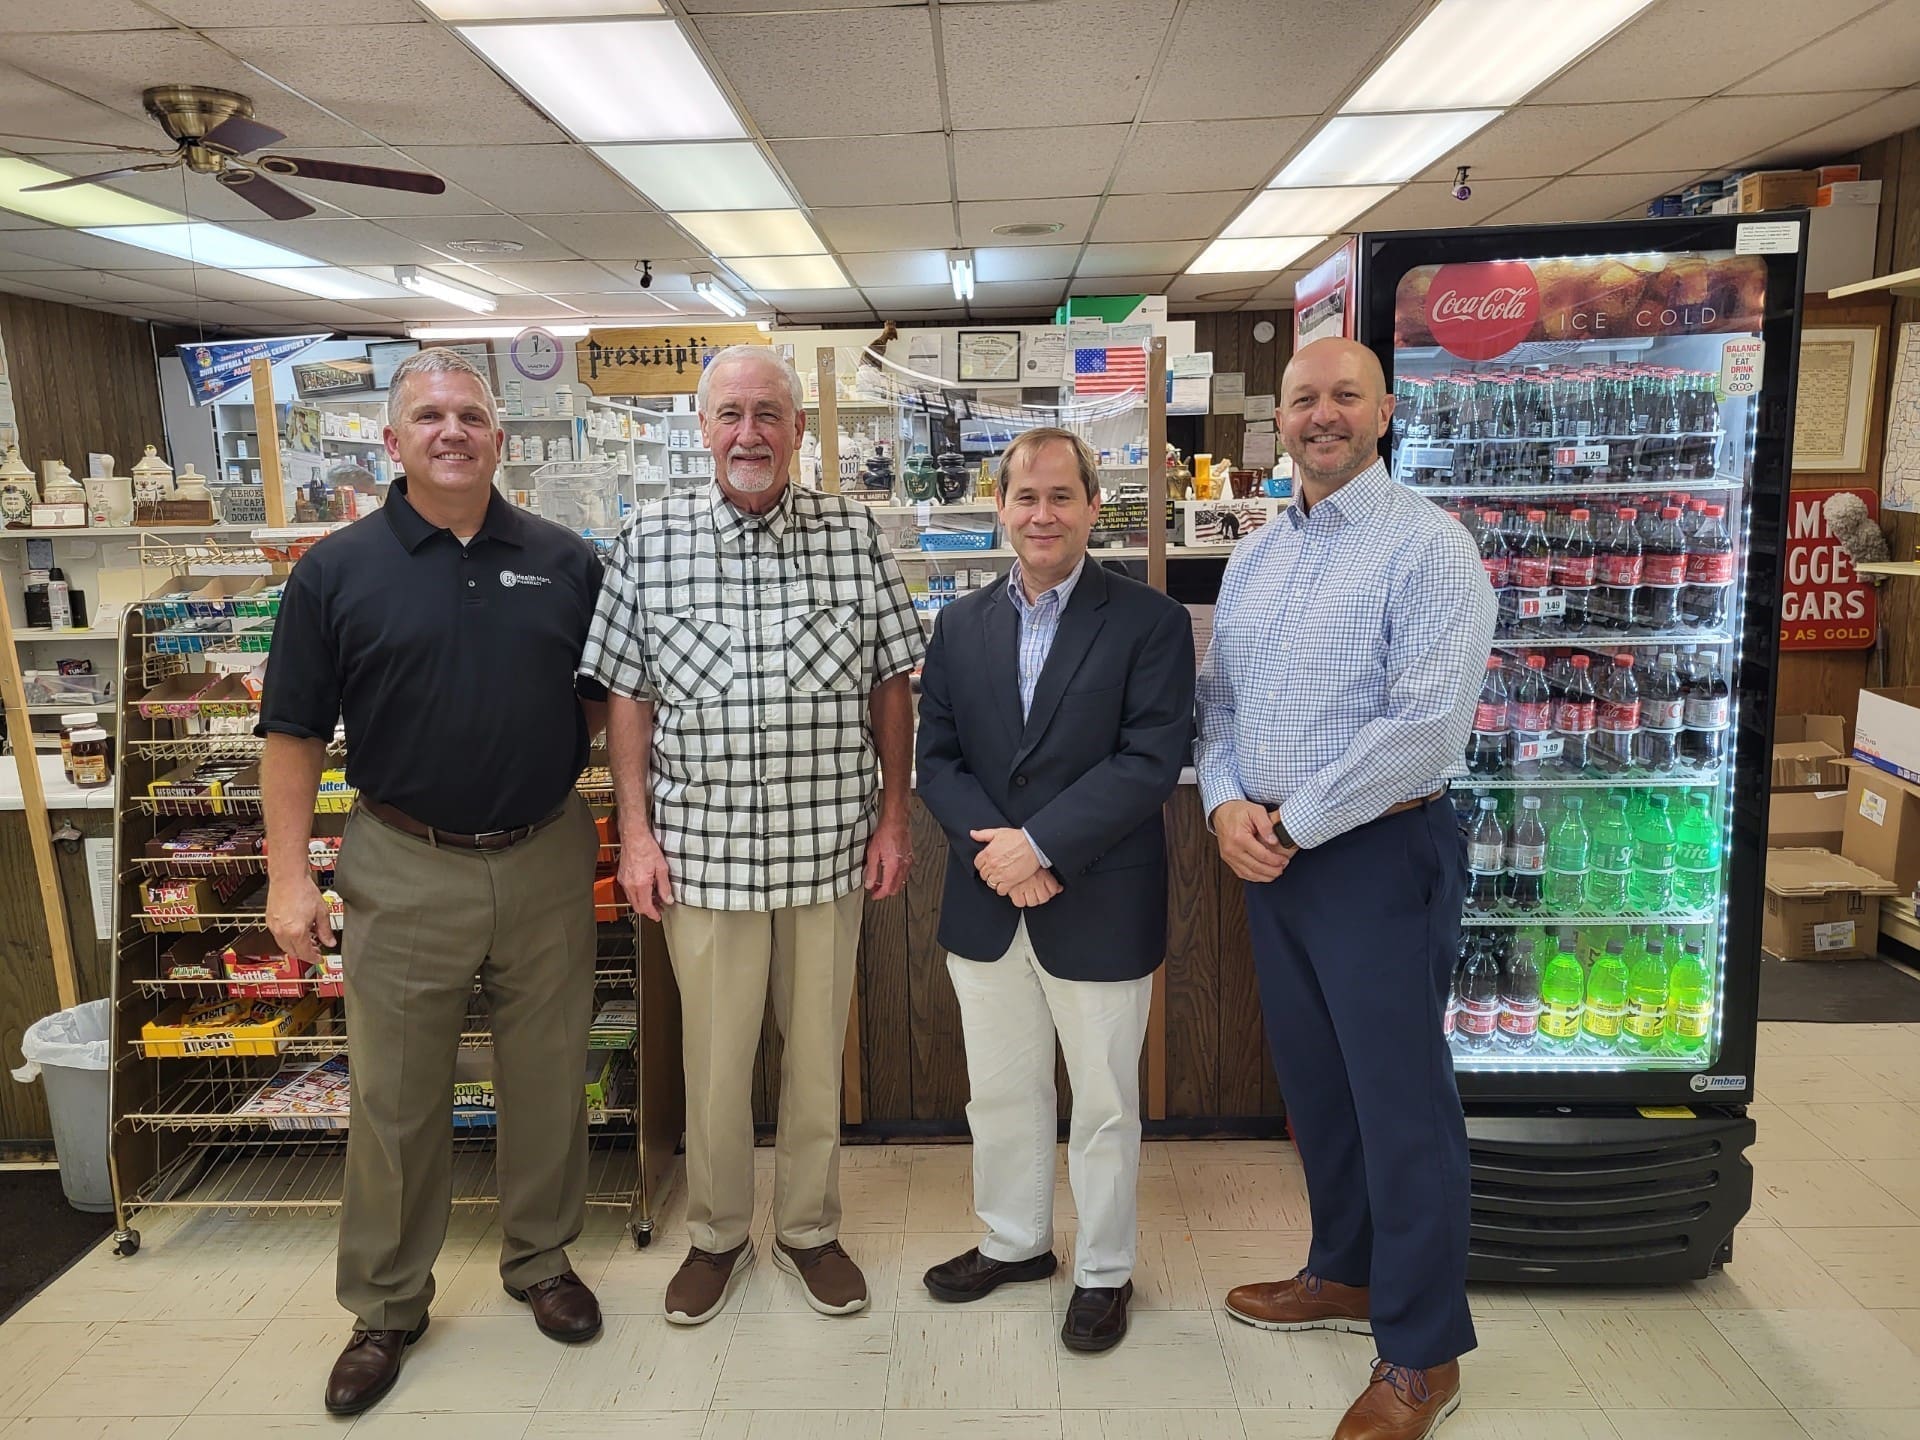 District Director Paul Housel for U.S. Representative Robert Aderholt (R-AL) was hosted Health Mart’s Jerry’s Discount Pharmacy at an August 1 Gadsden AL pharmacy tour